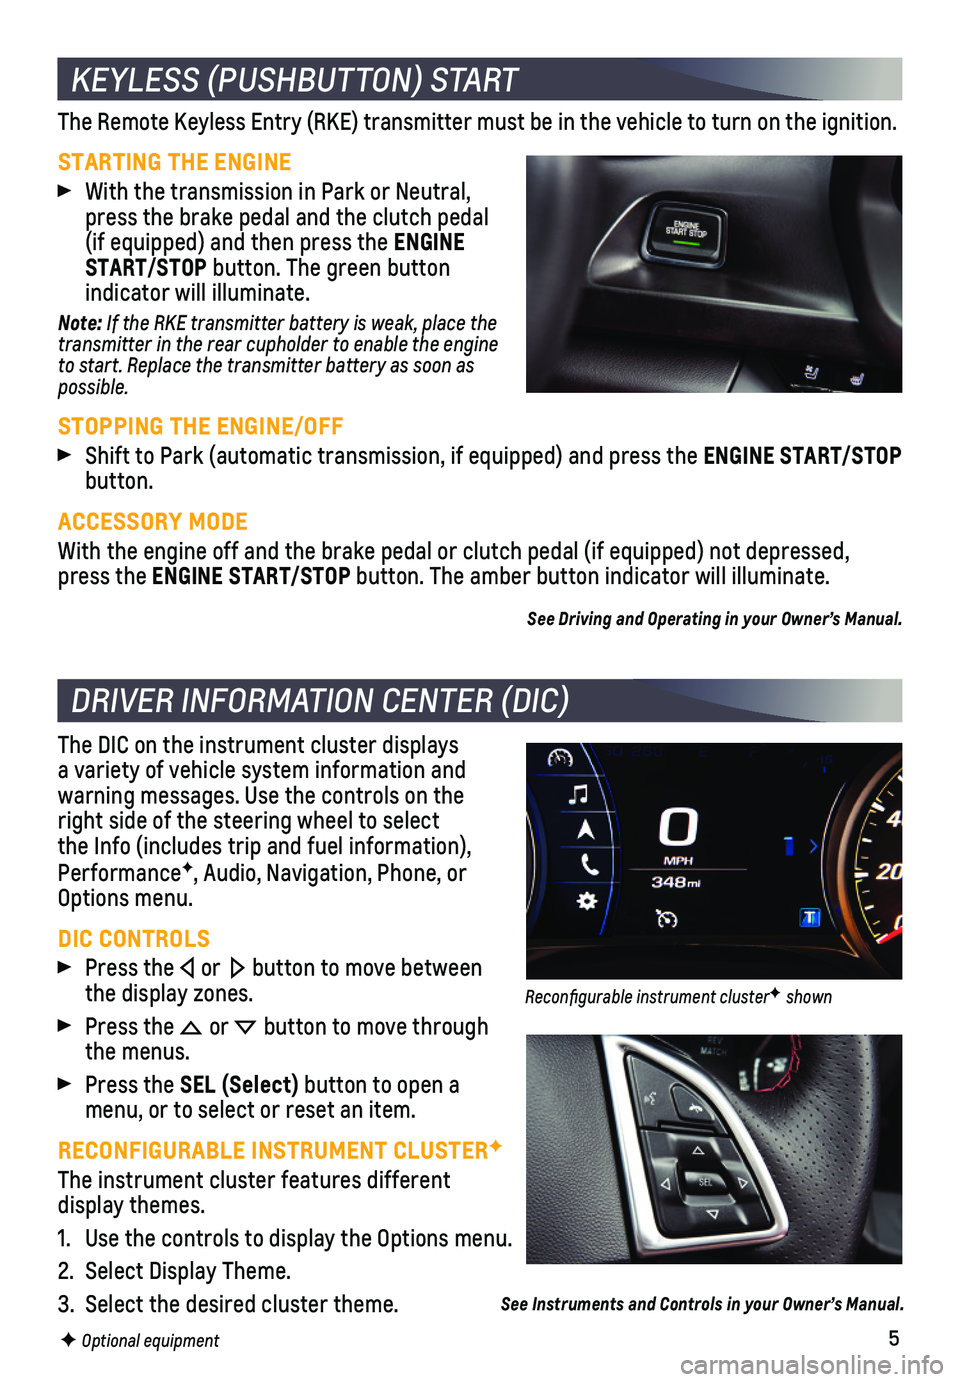 CHEVROLET CAMARO 2020  Owners Manual 5
The Remote Keyless Entry (RKE) transmitter must be in the vehicle to t\
urn on the ignition.
STARTING THE ENGINE
 With the transmission in Park or Neutral, press the brake pedal and the clutch pedal